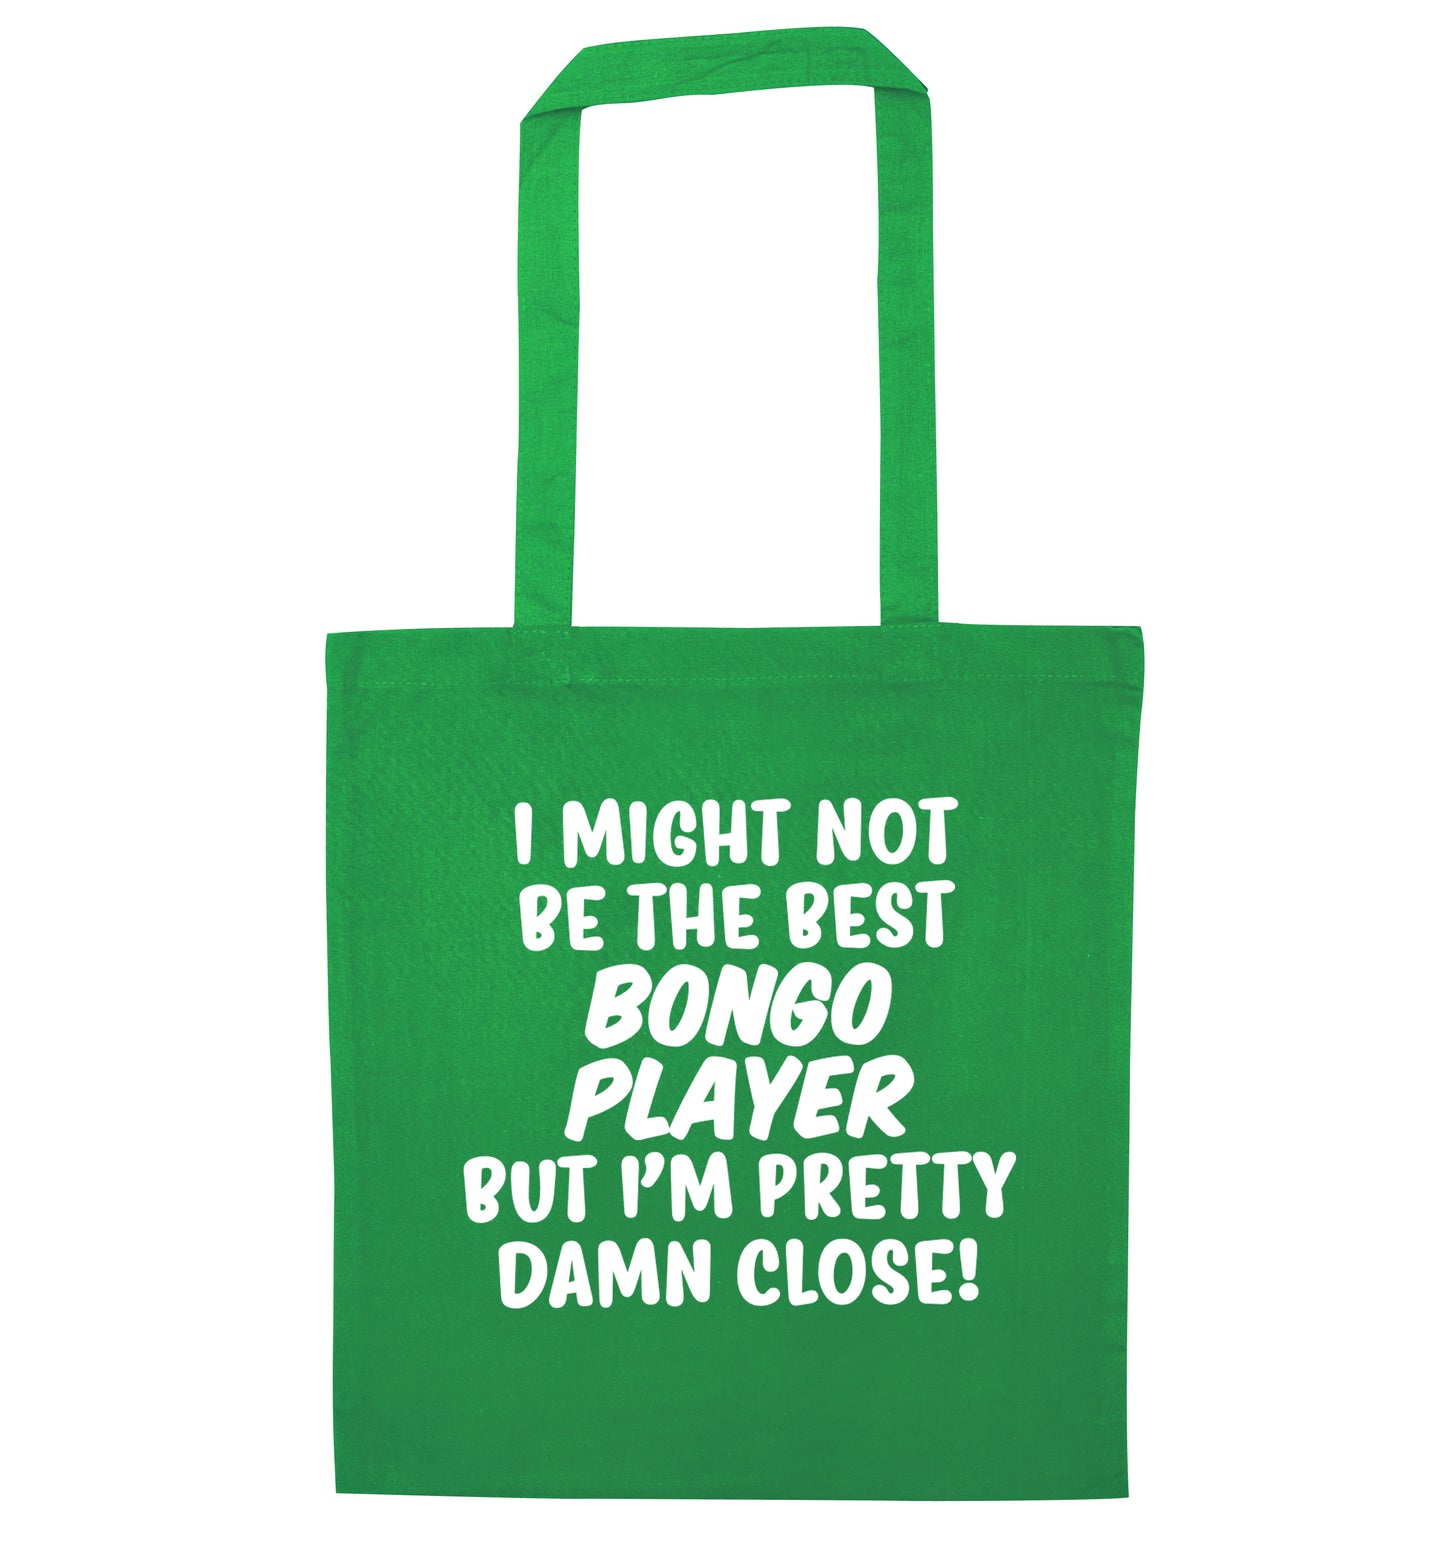 I might not be the best bongo player but I'm pretty close! green tote bag